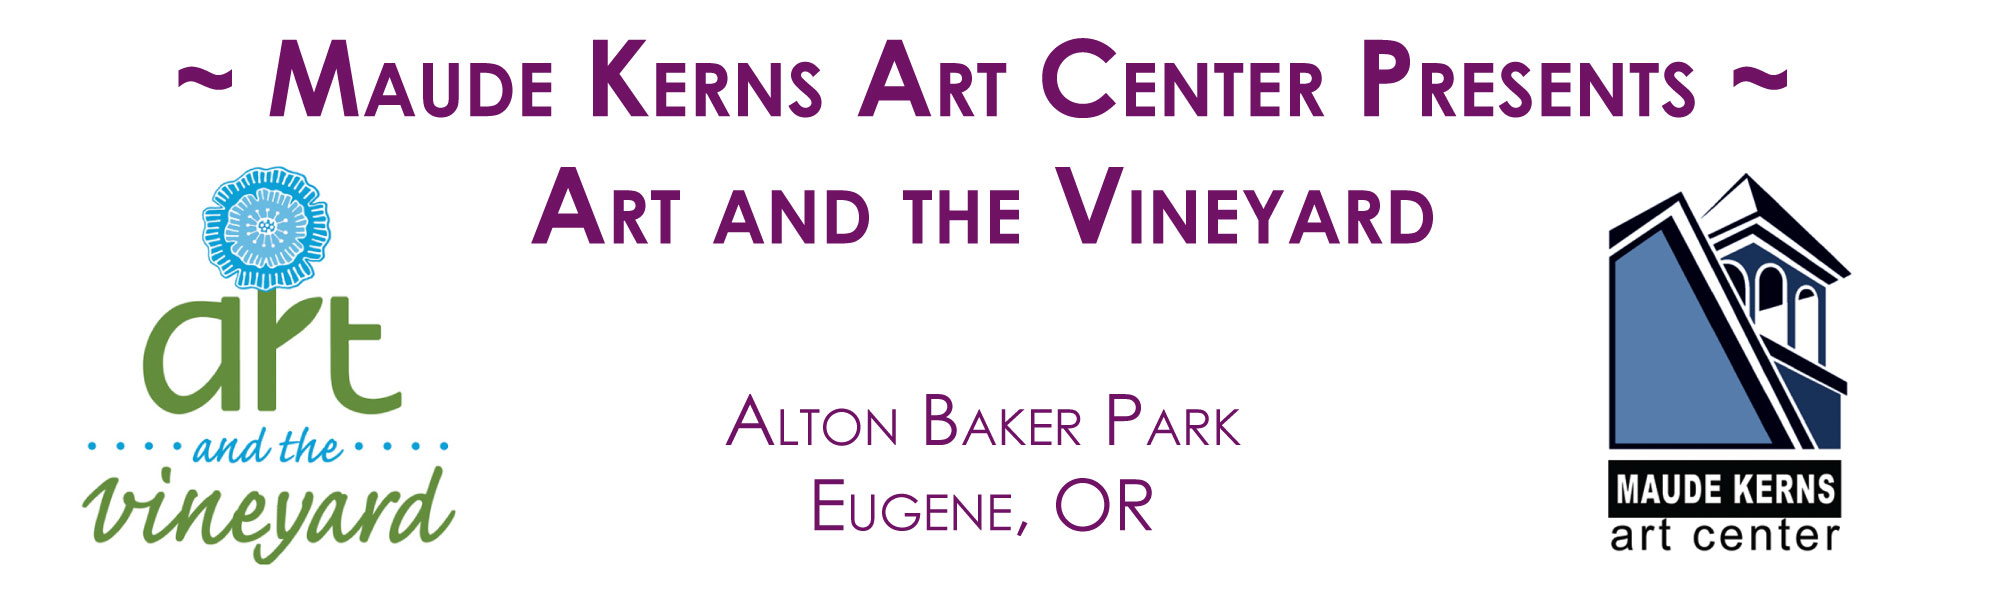 ART AND THE VINEYARD